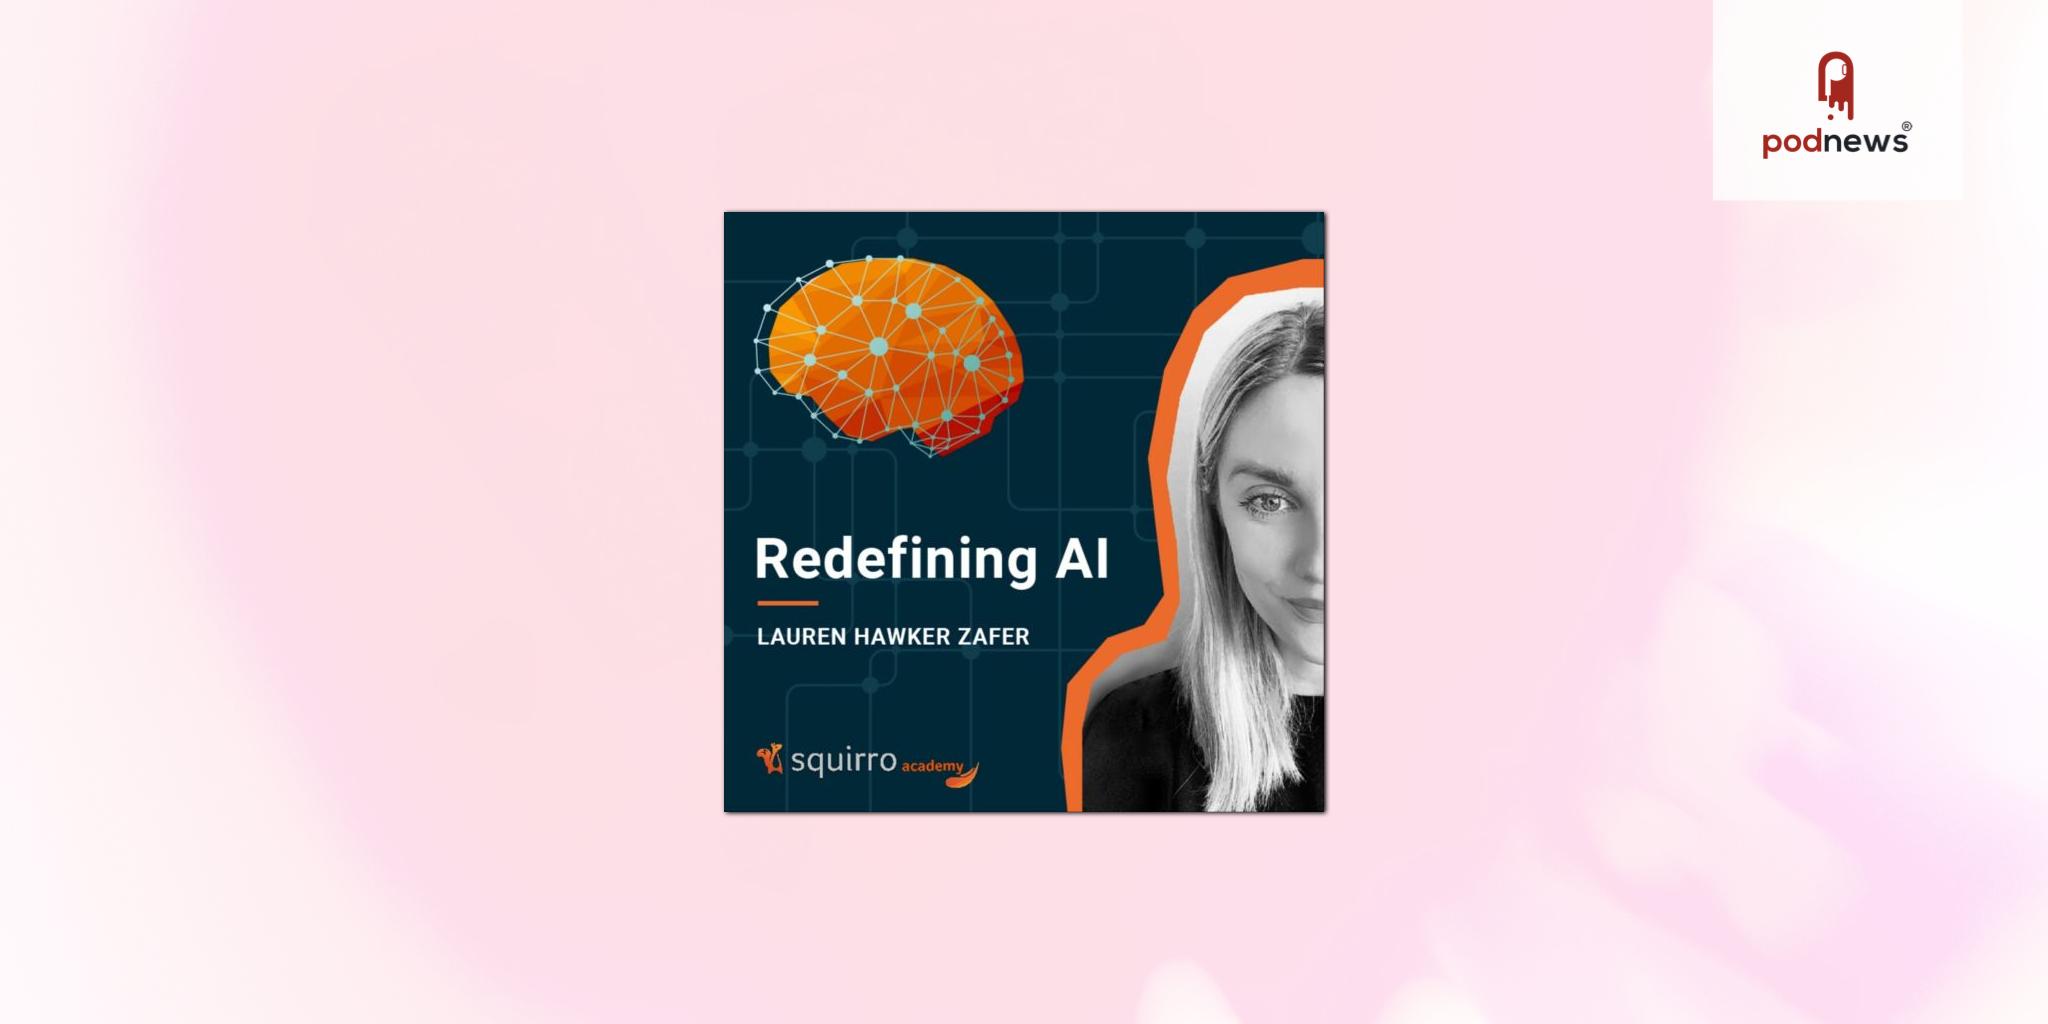 Squirro Launches Second Season of Redefining AI Podcast